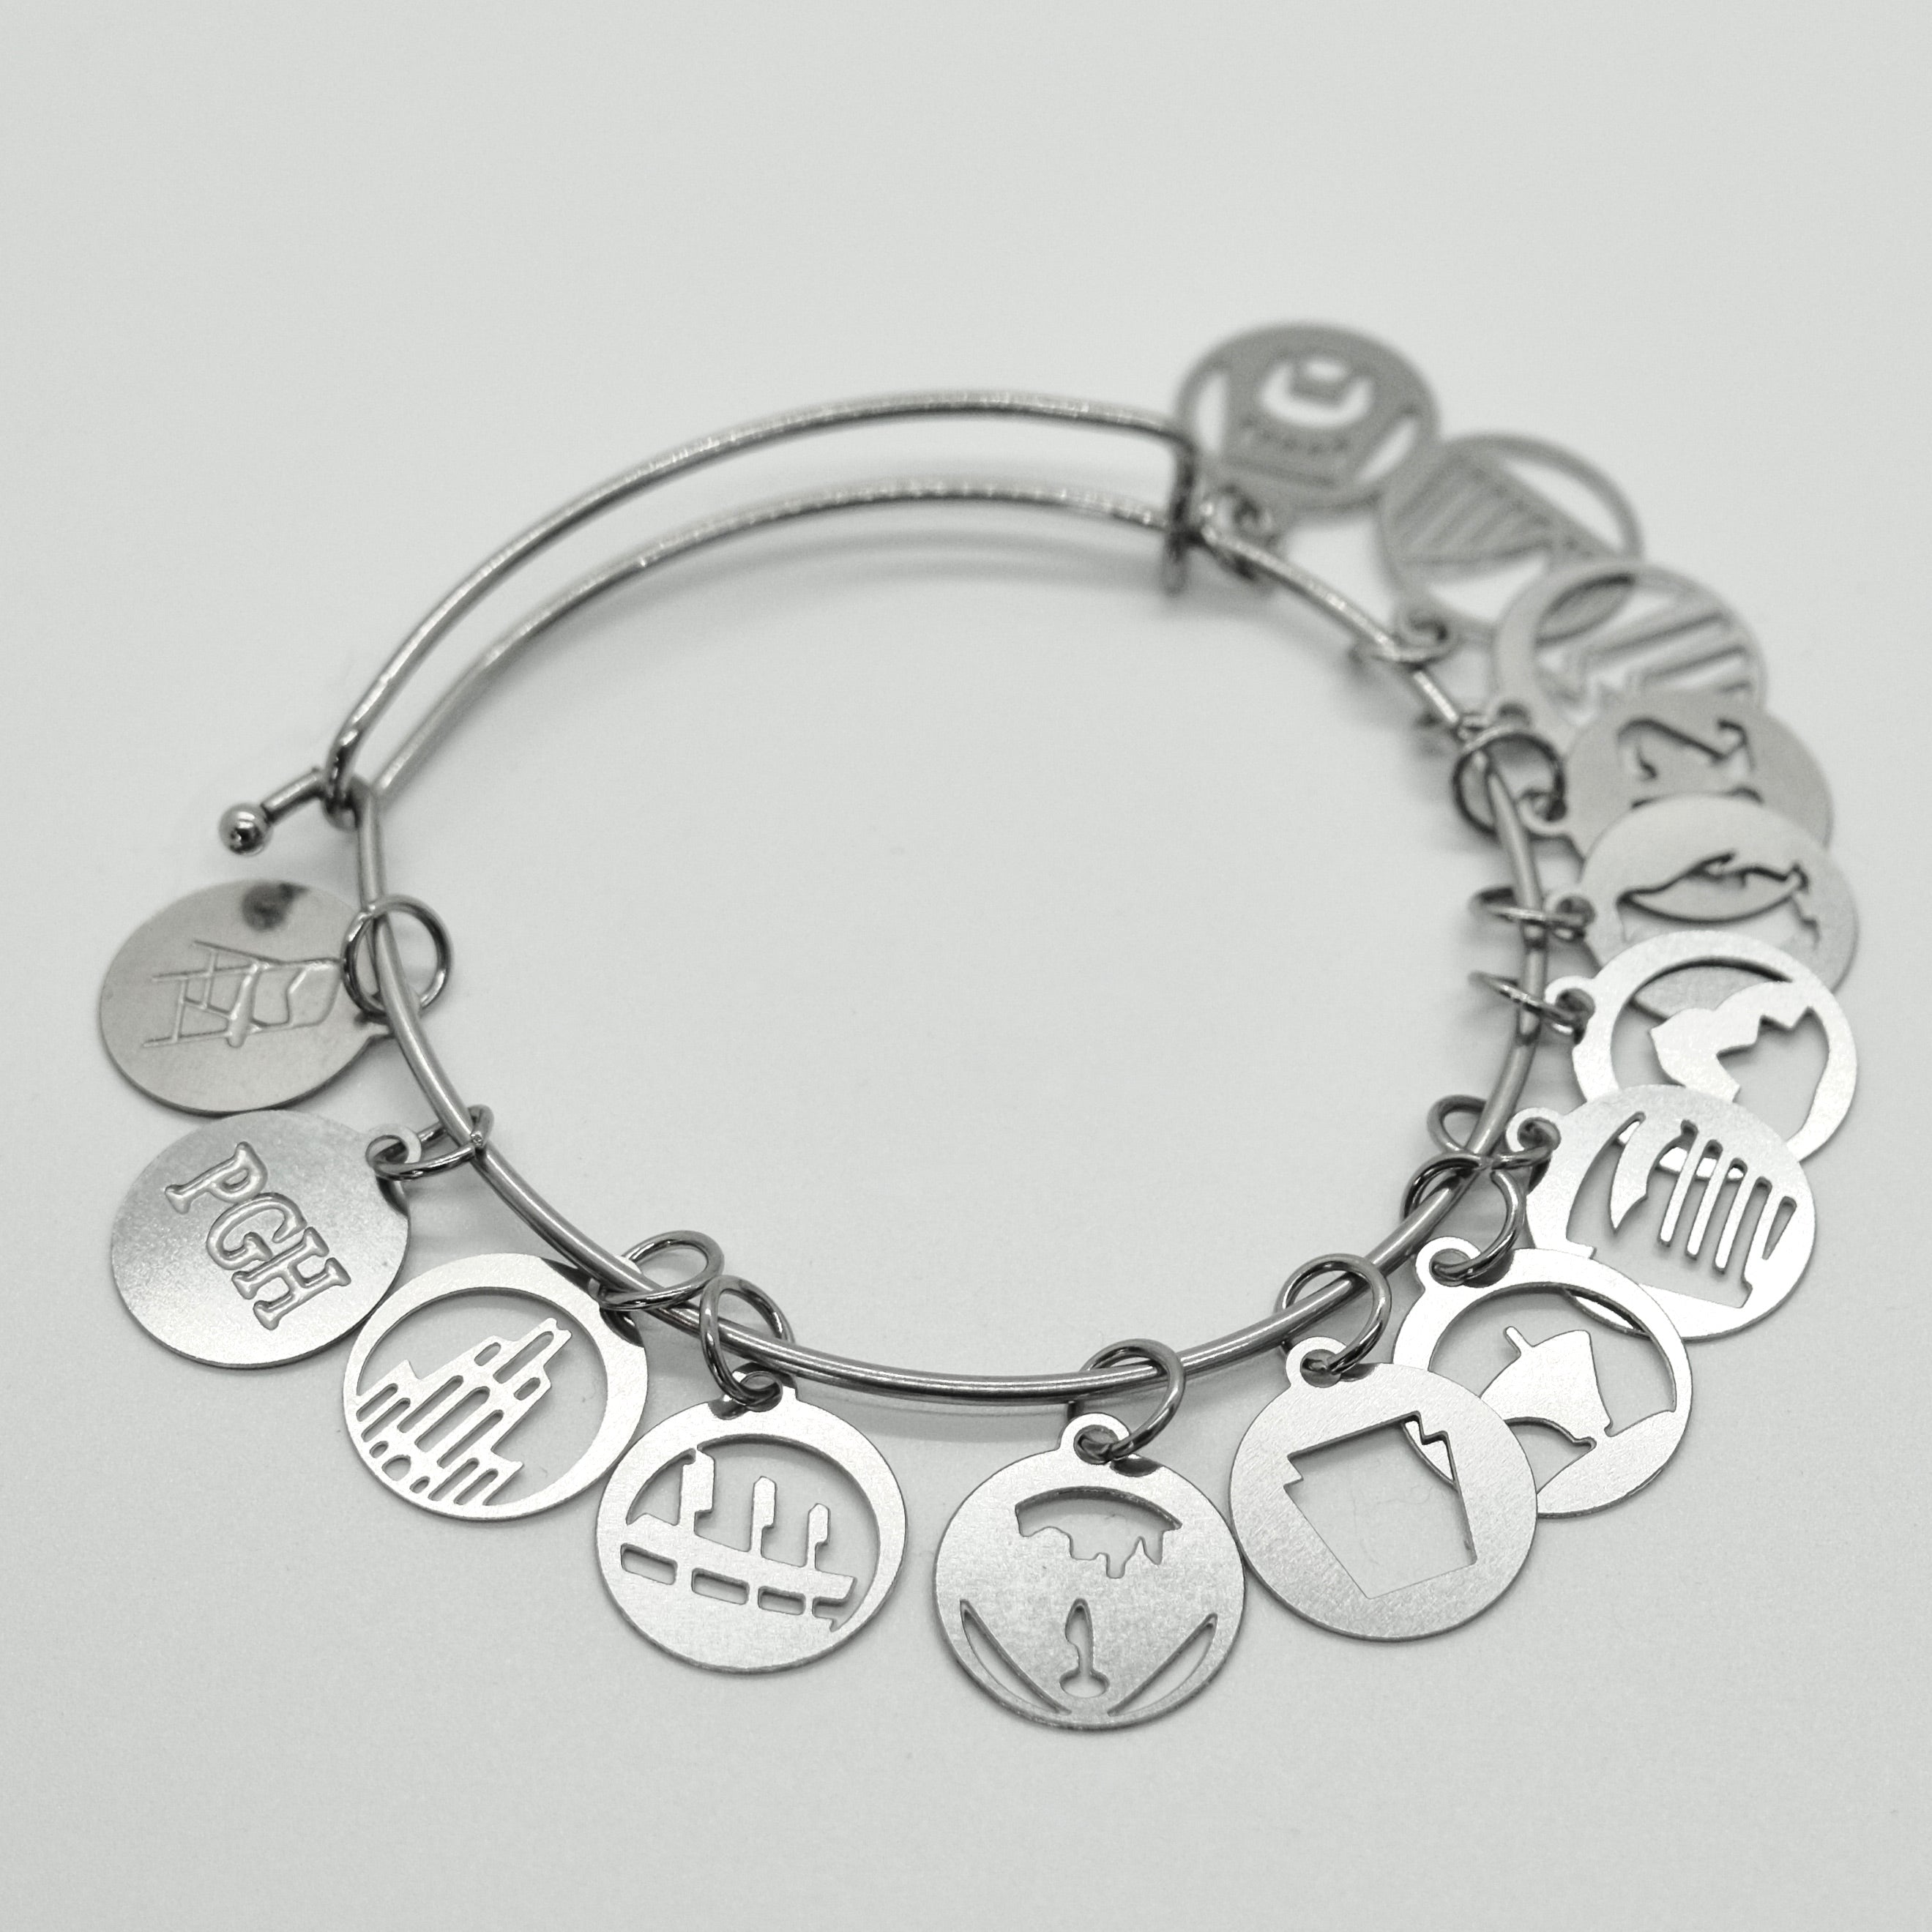 Build your own Pittsburgh Bangle Charm Bracelet